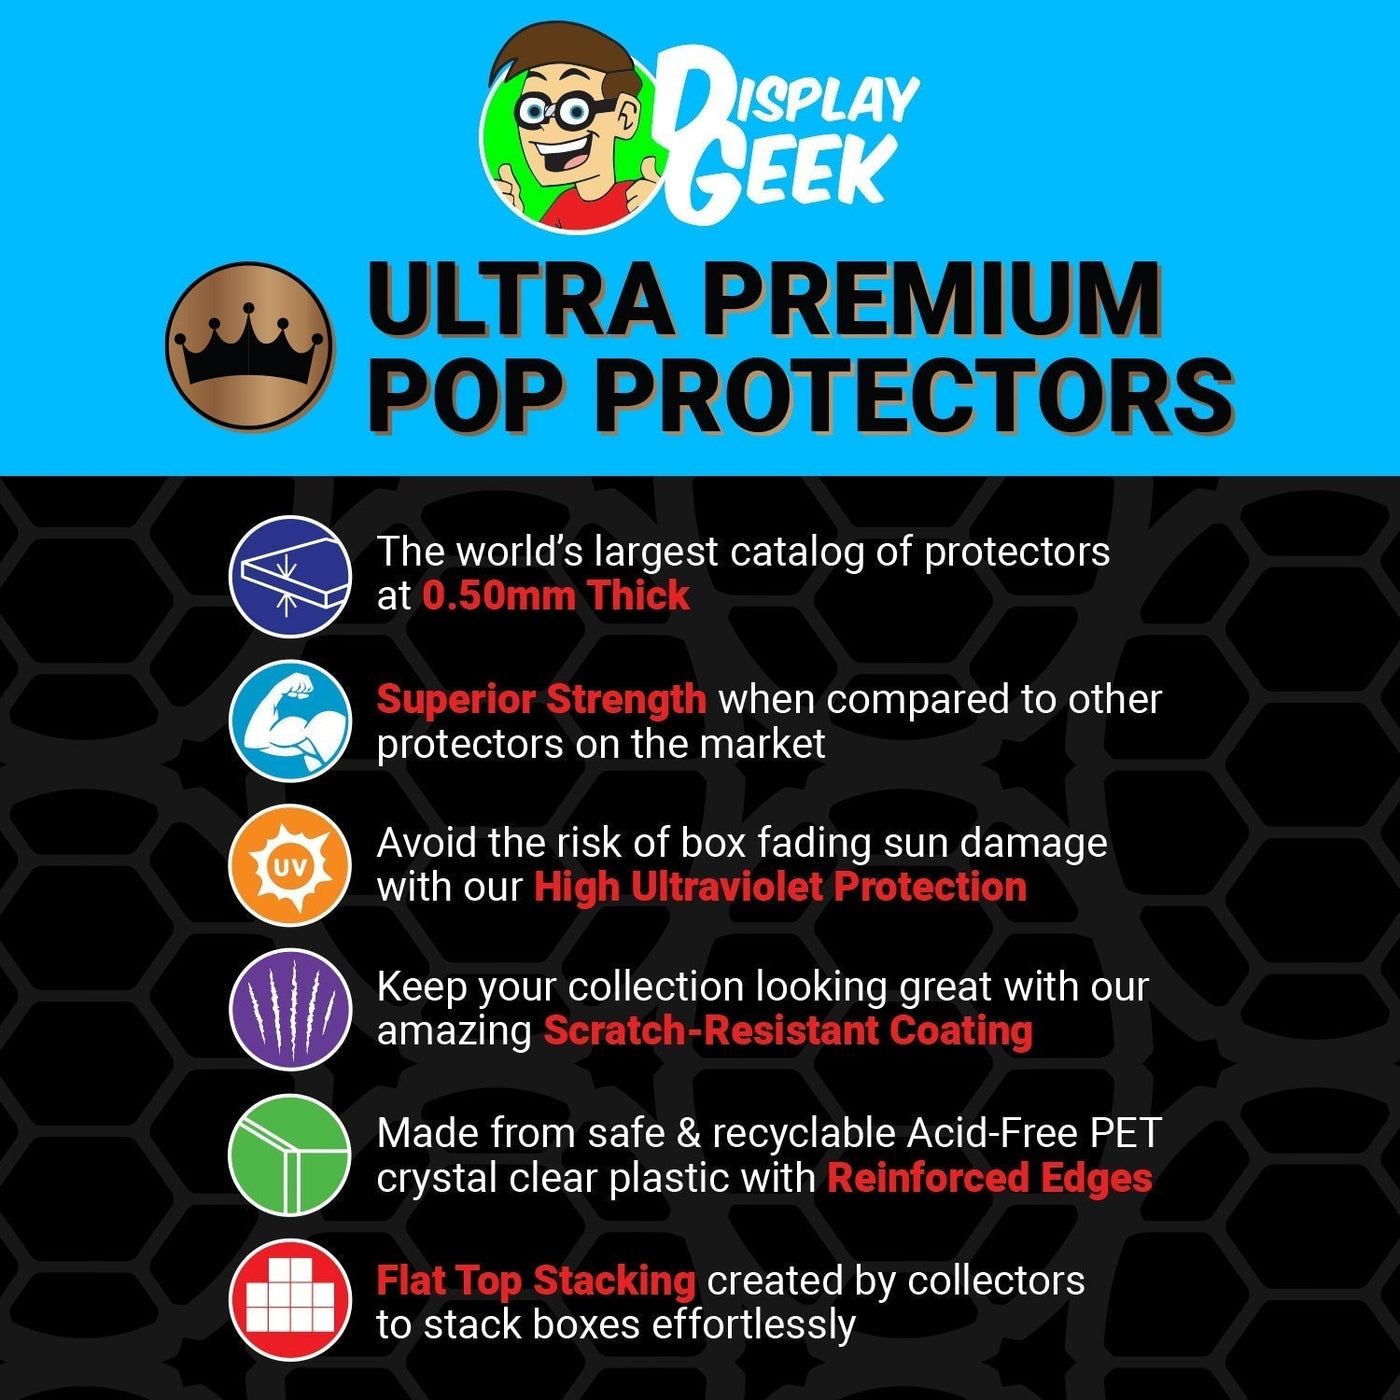 Pop Protector for 6 inch One Piece Child Big Mom #1271 Super Funko Pop on The Protector Guide App by Display Geek